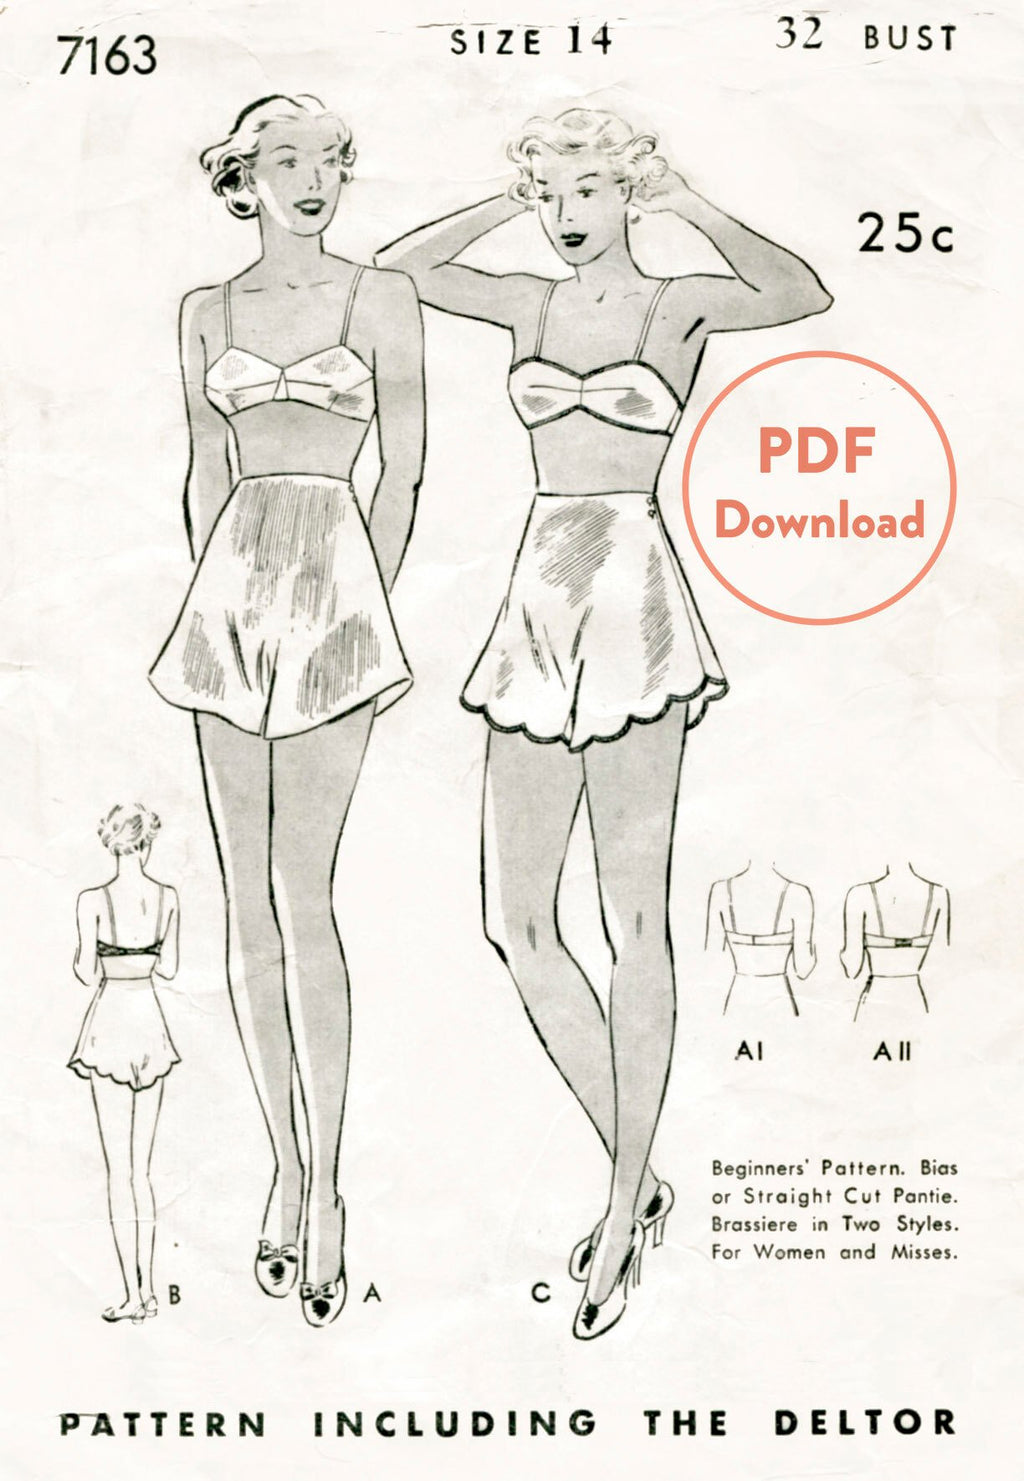 Butterick 7163 1930s vintage lingerie sewing pattern bra and tap shorts PDF download